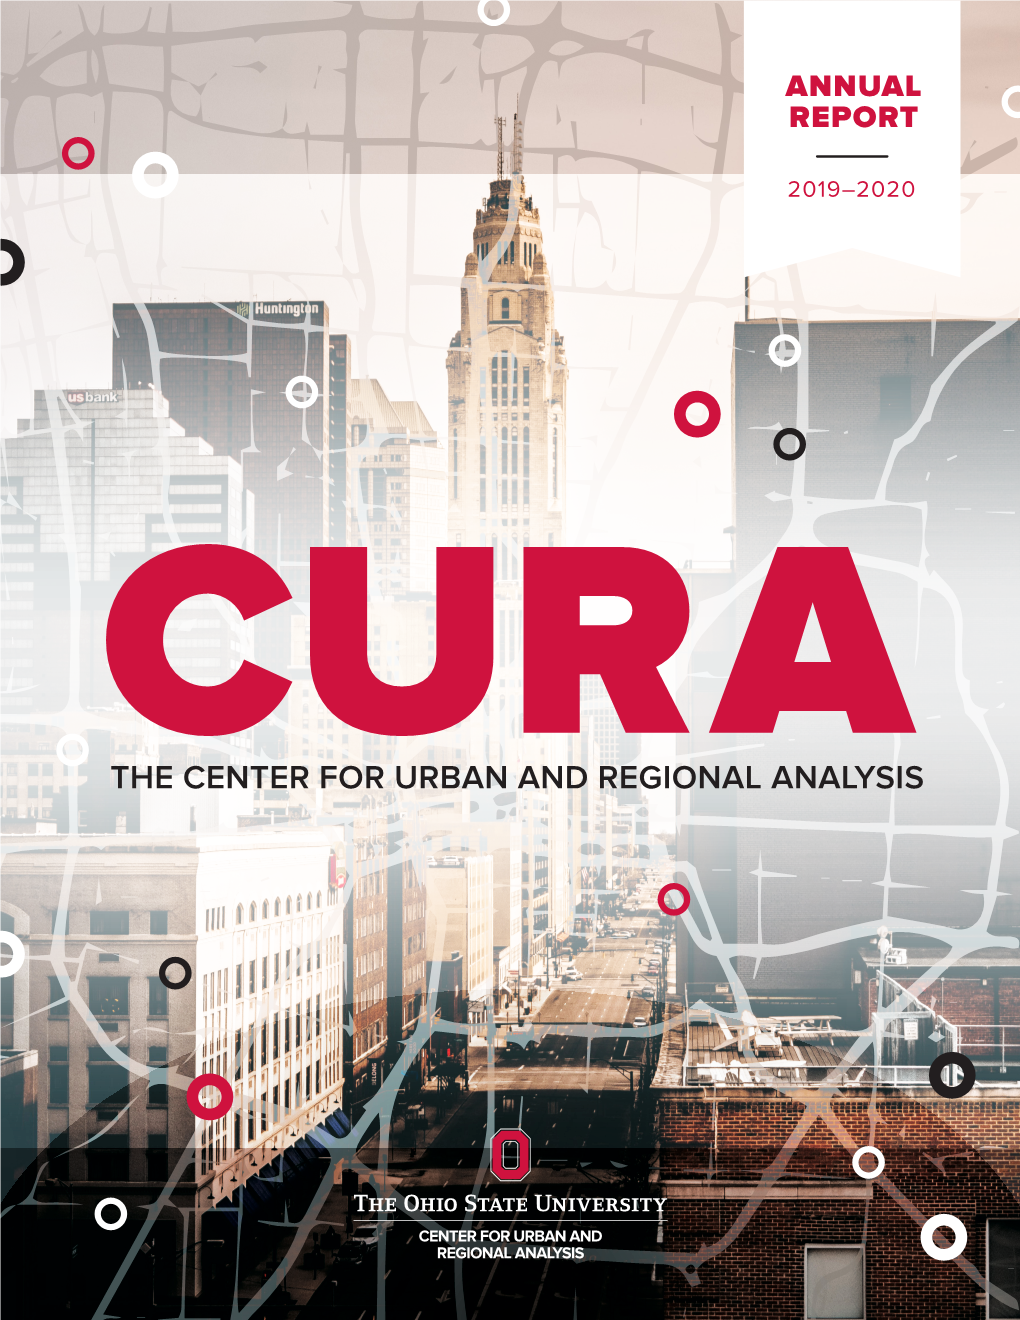 The Center for Urban and Regional Analysis